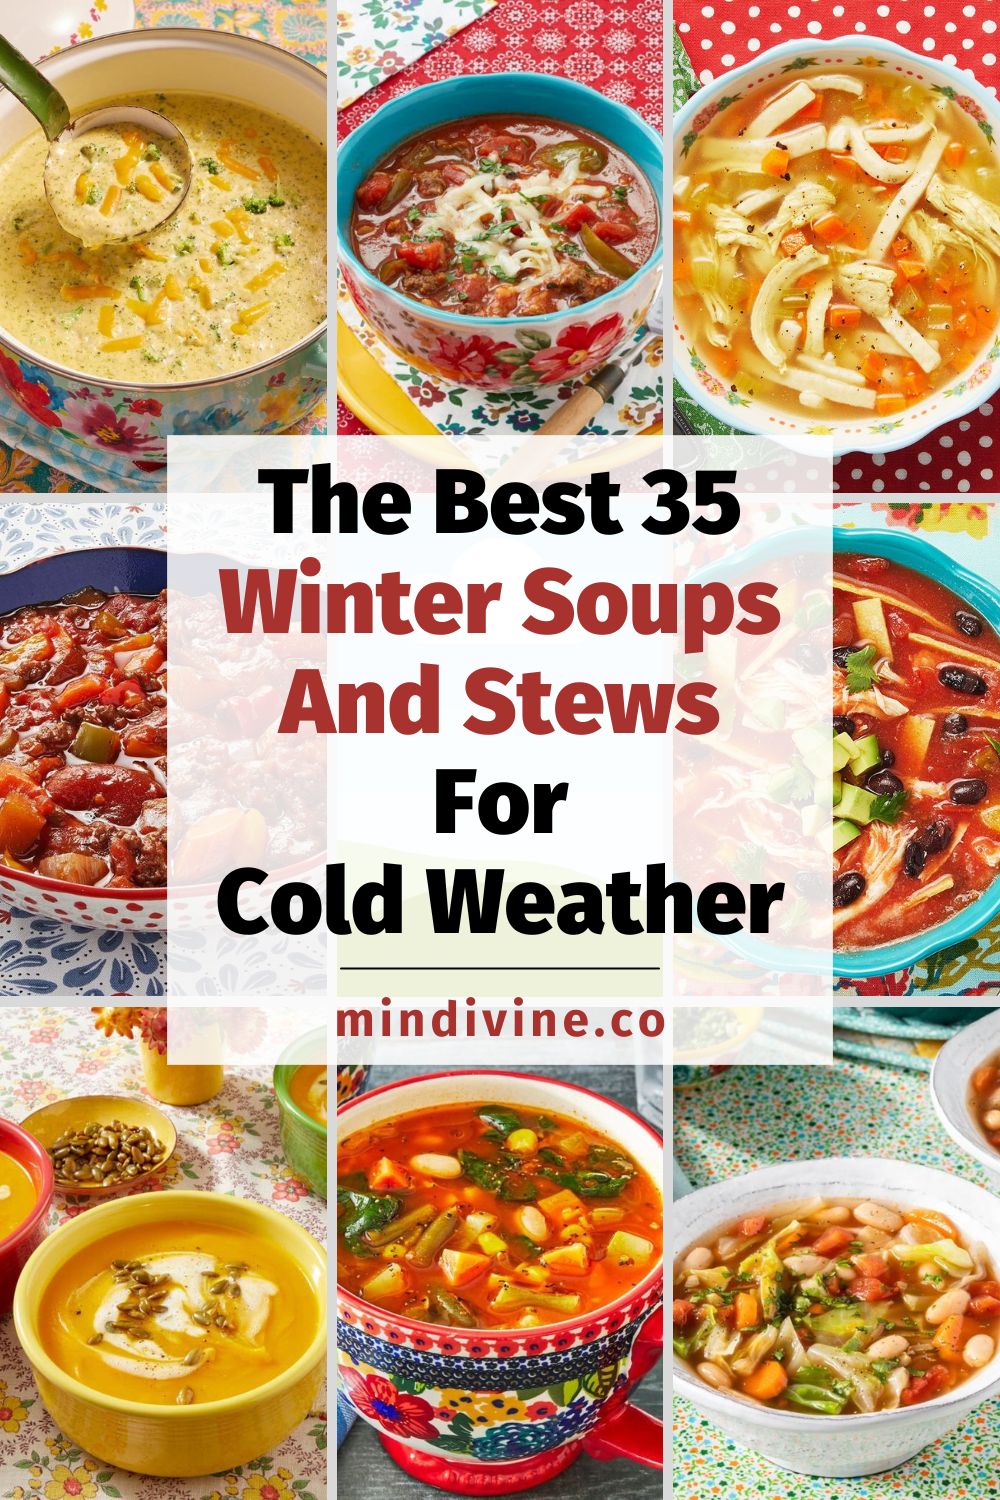 Winter Soups And Stews For Cold Weather